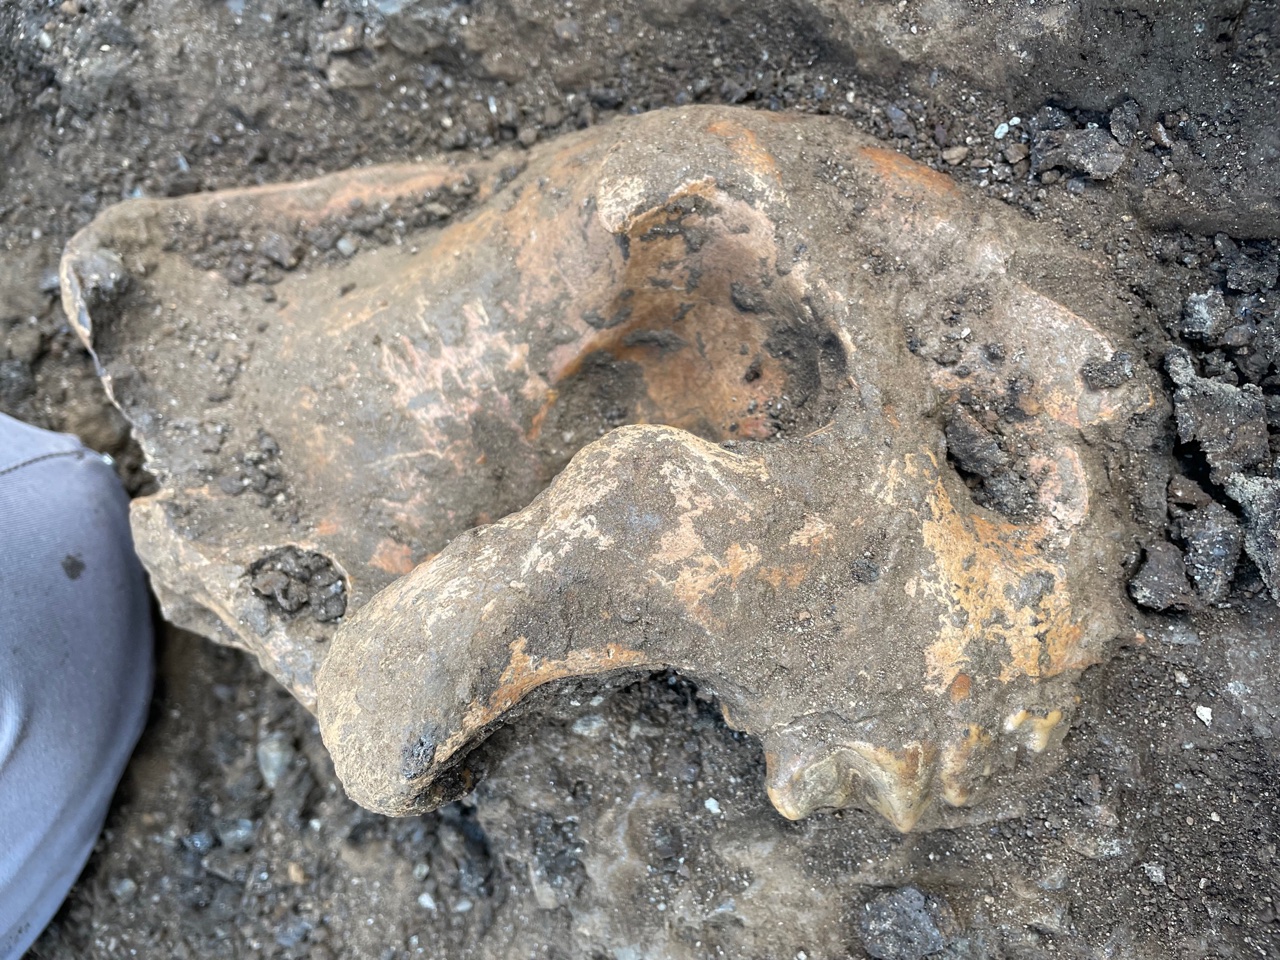 Fossil in the dirt